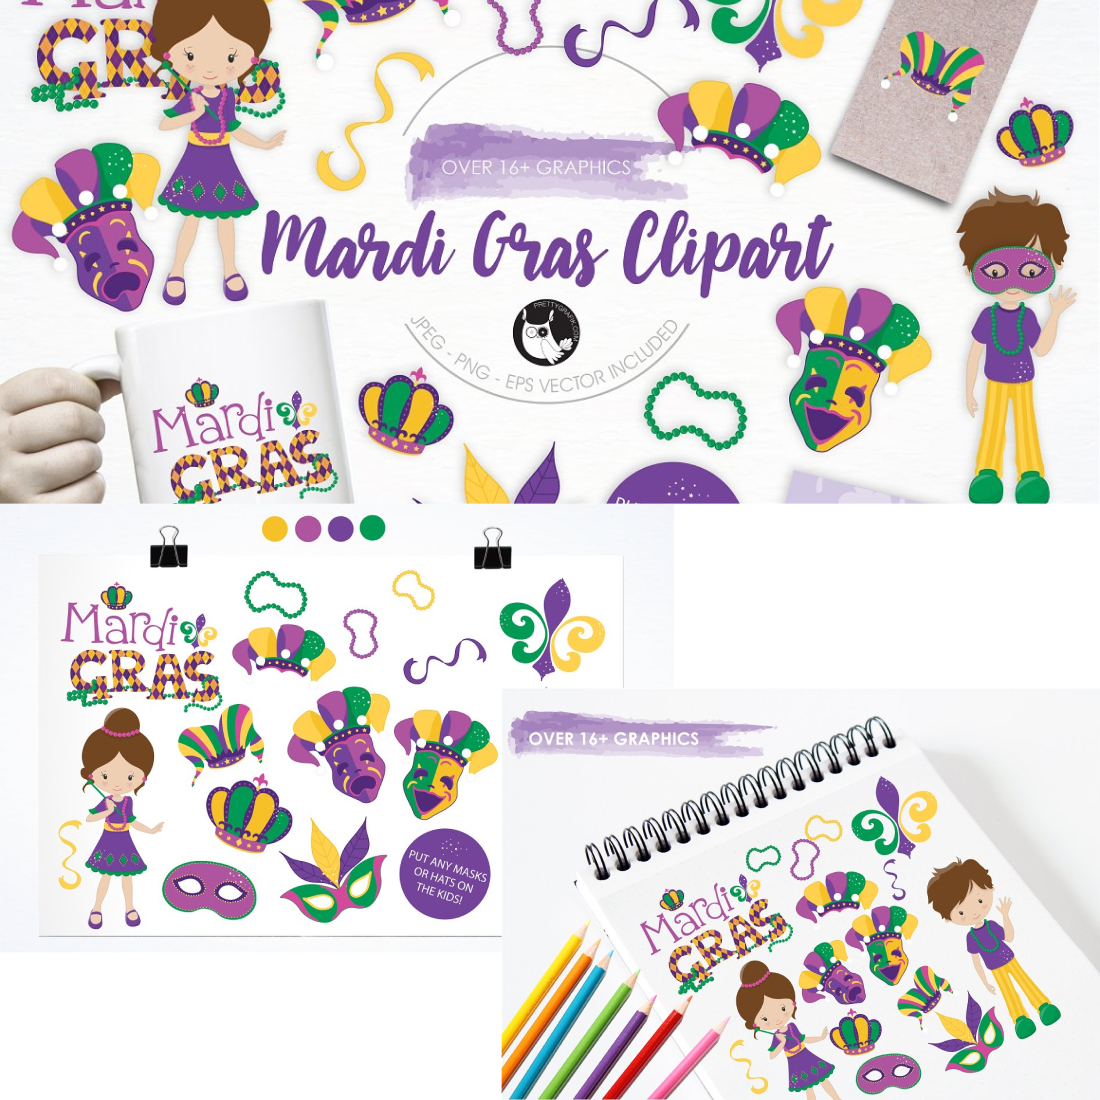 Preview mardi gras clipart illustration pack.